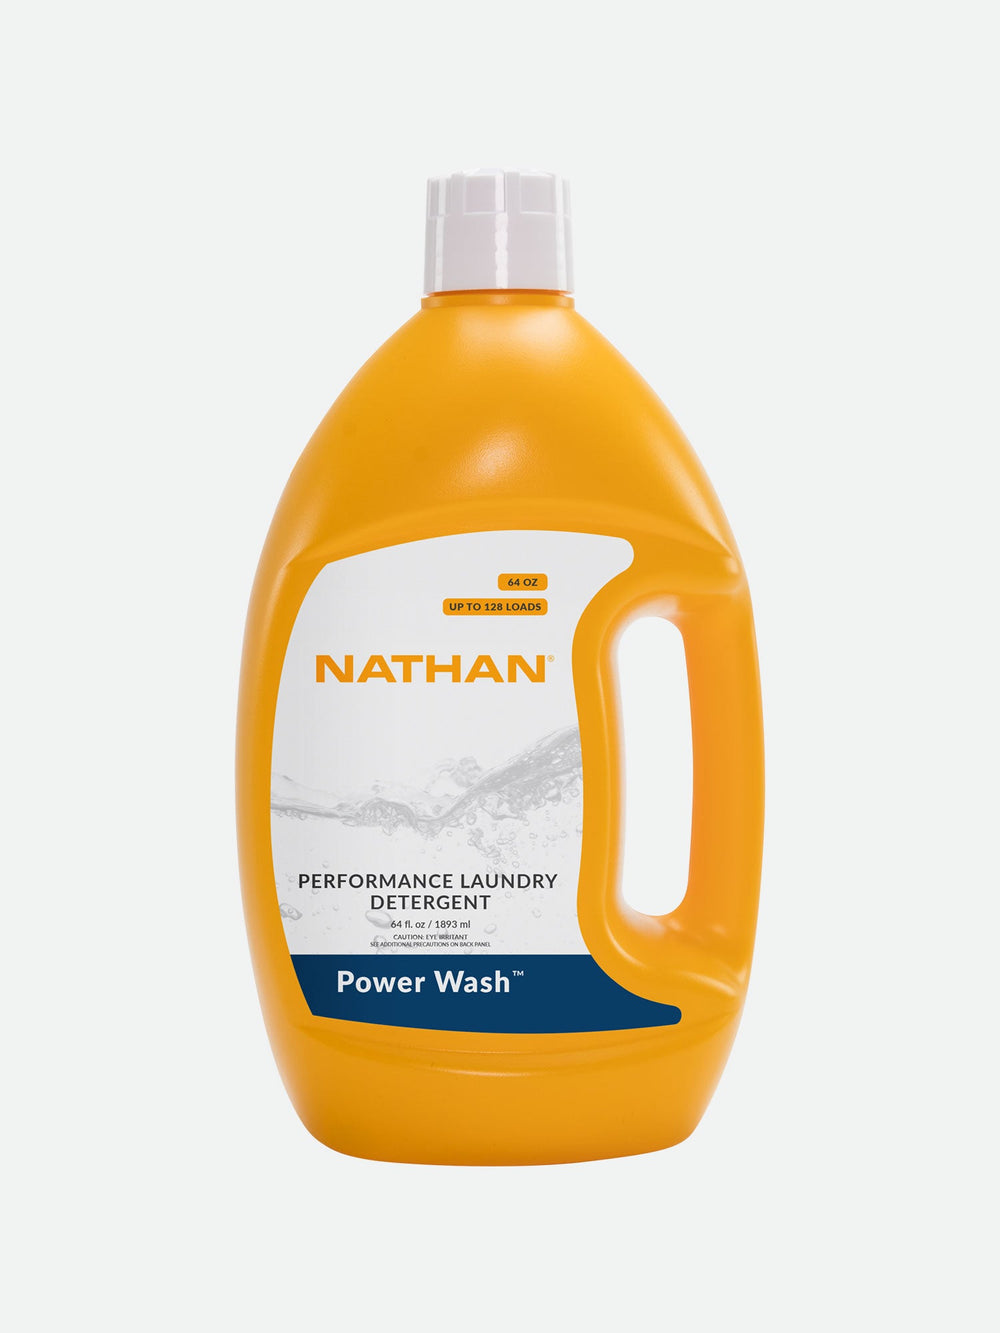 Nathan Power Wash Performance Laundry Detergent